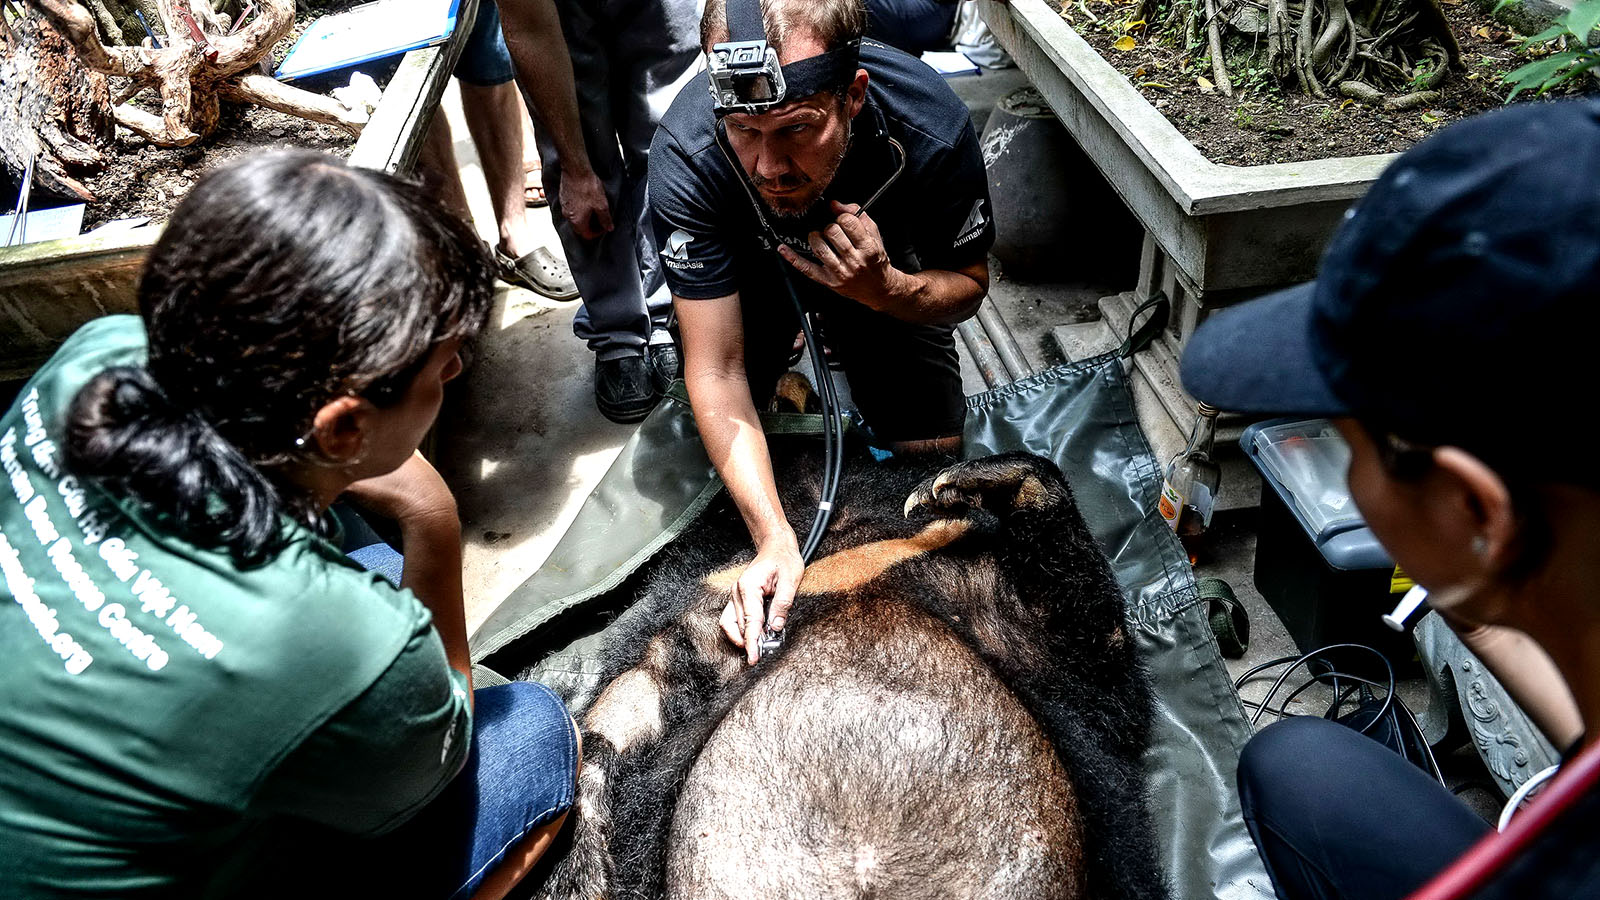 Veterinarians examine the condition of a bear after it is released from captivity. Photo: Tuoi Tre